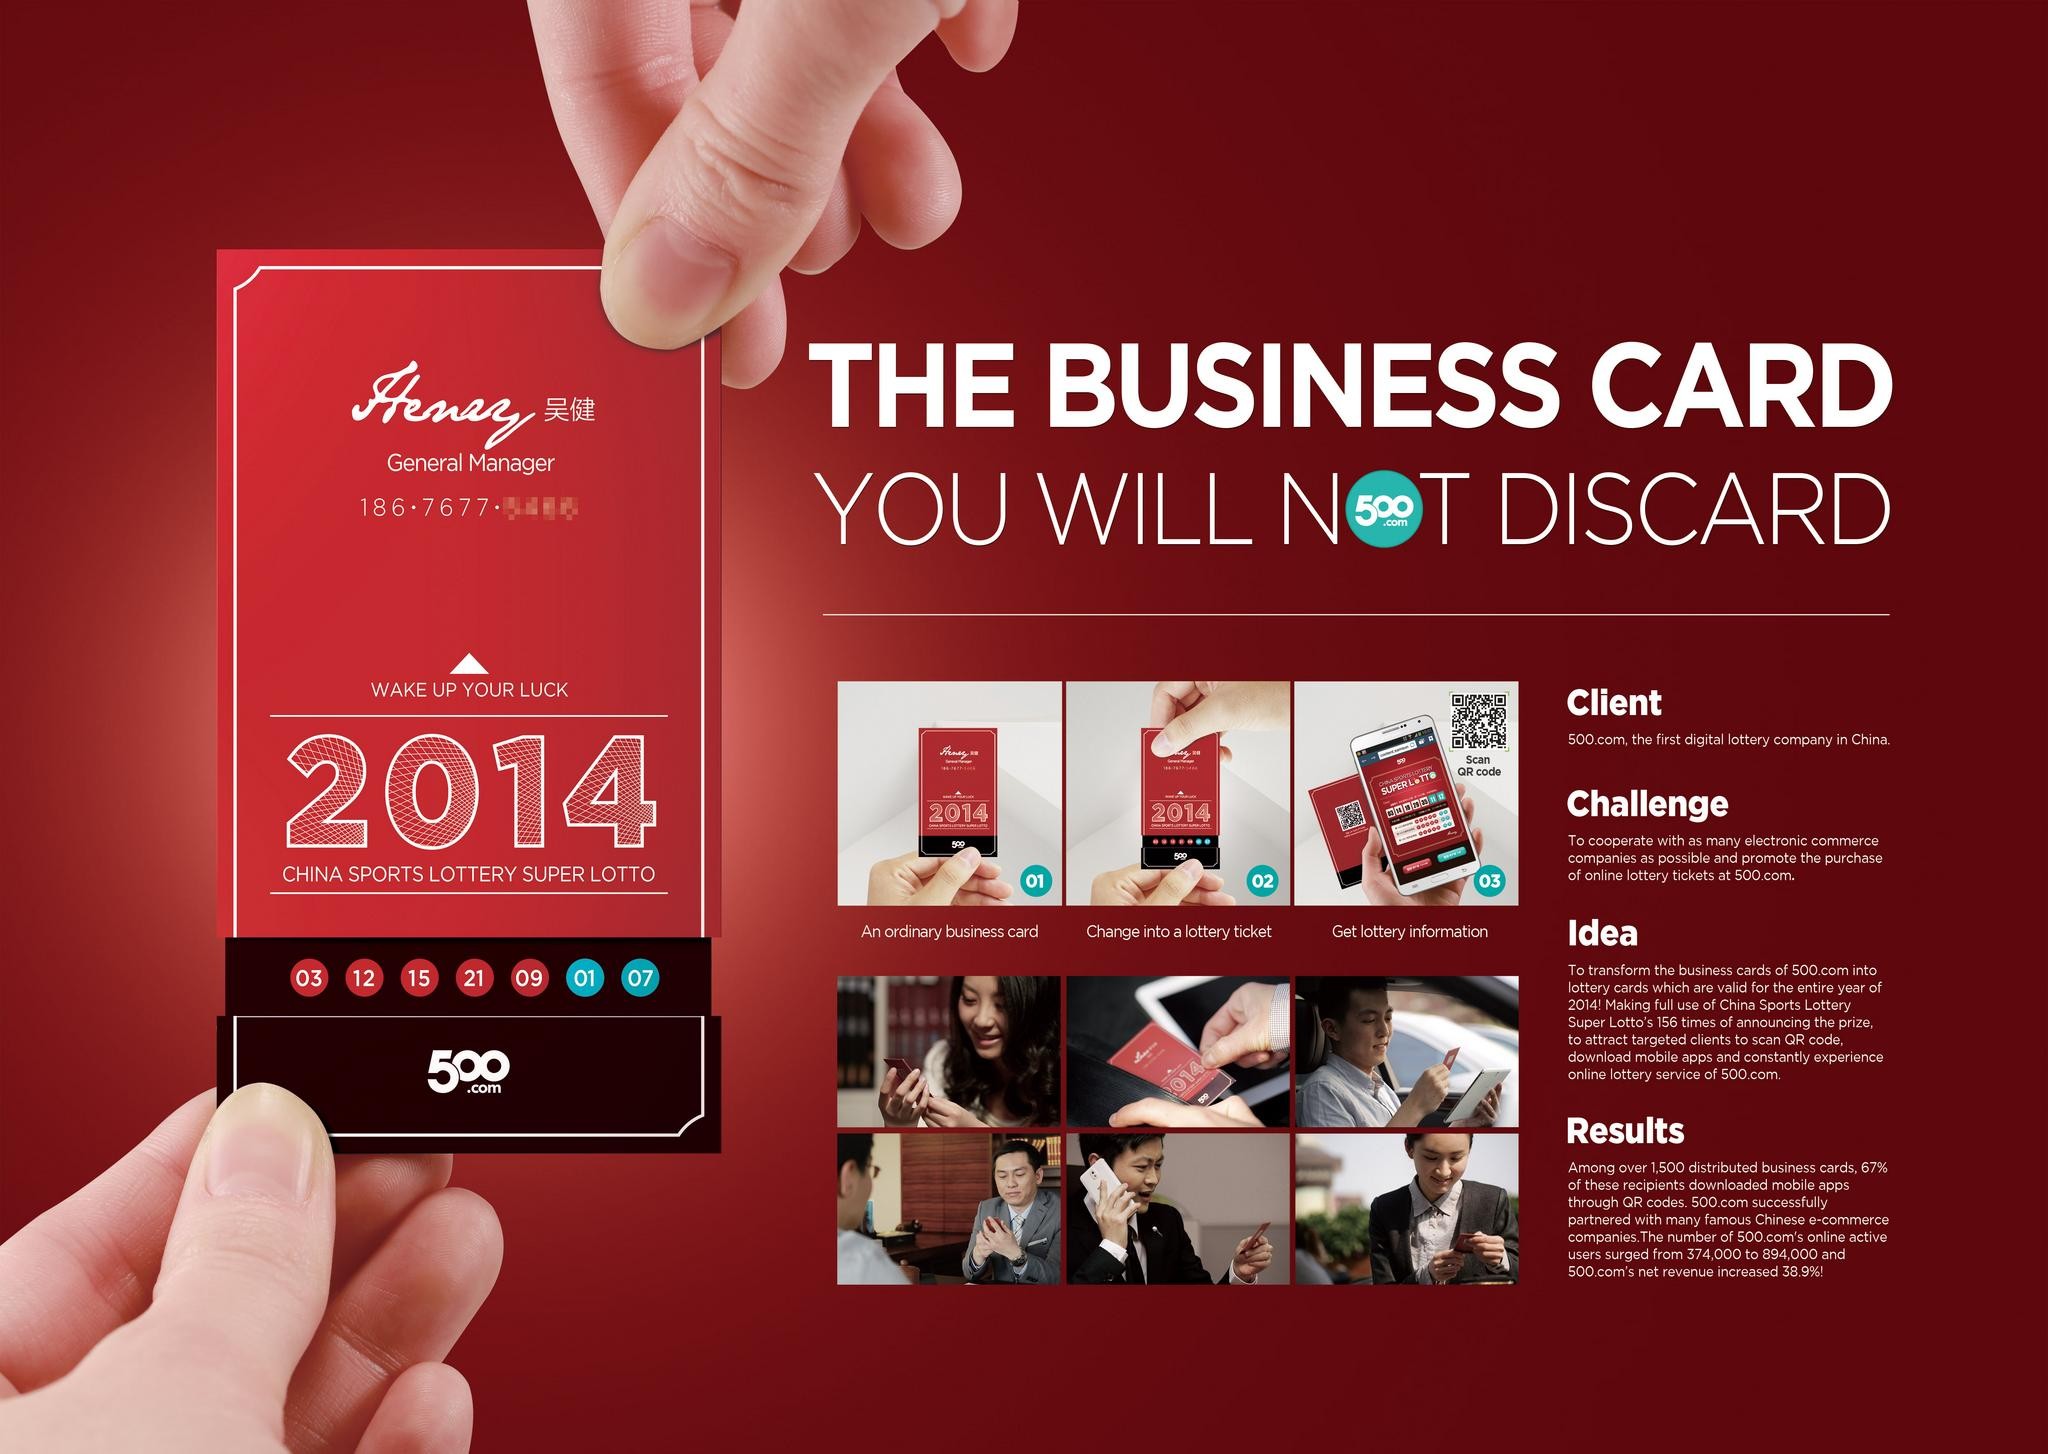 THE BUSINESS CARD YOU WILL NOT DISCARD